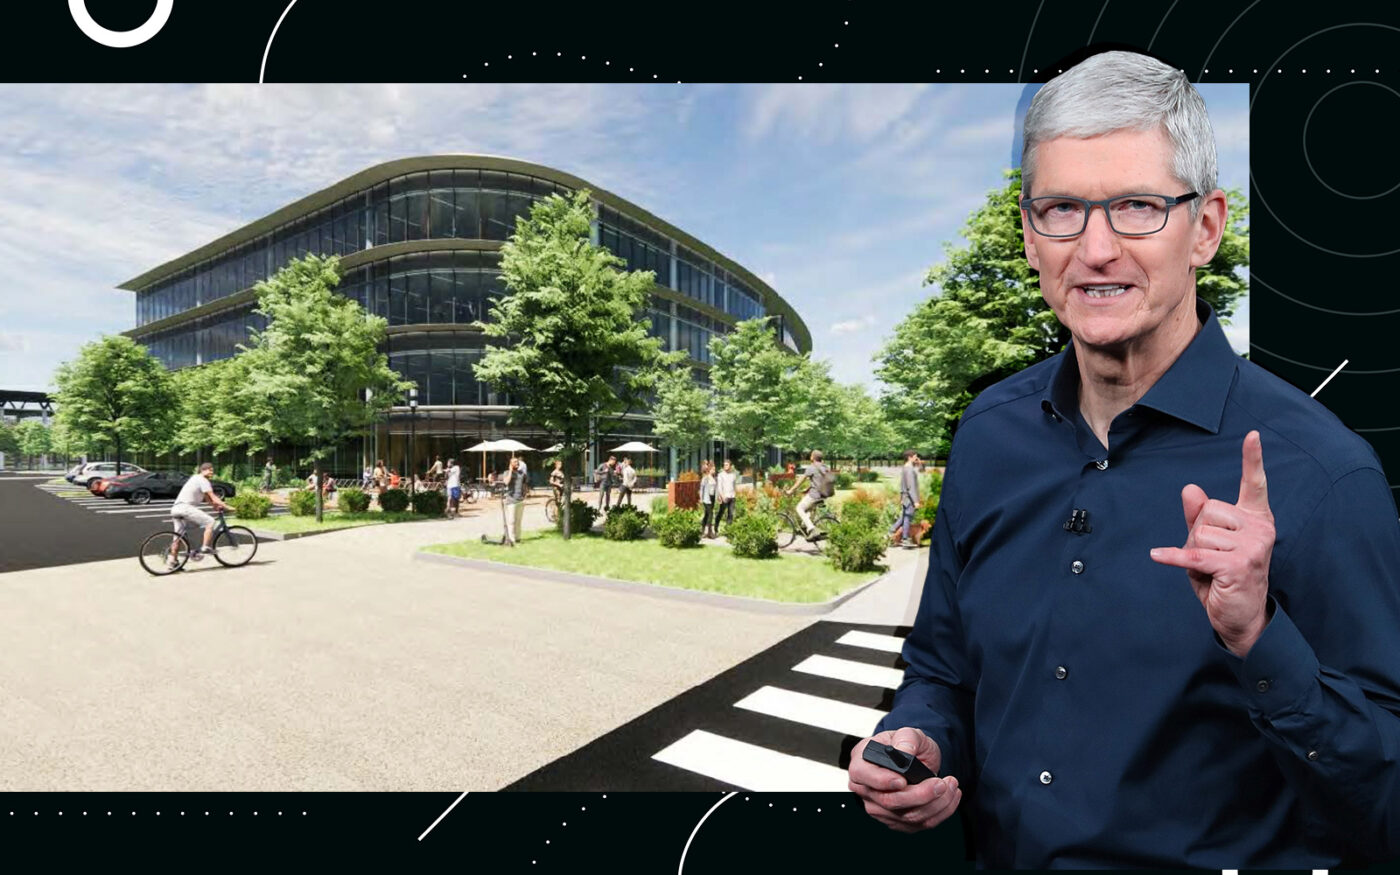 Apple's Tim Cook and Renderings of plans for 19191 Vallco PKWY in Cupertino